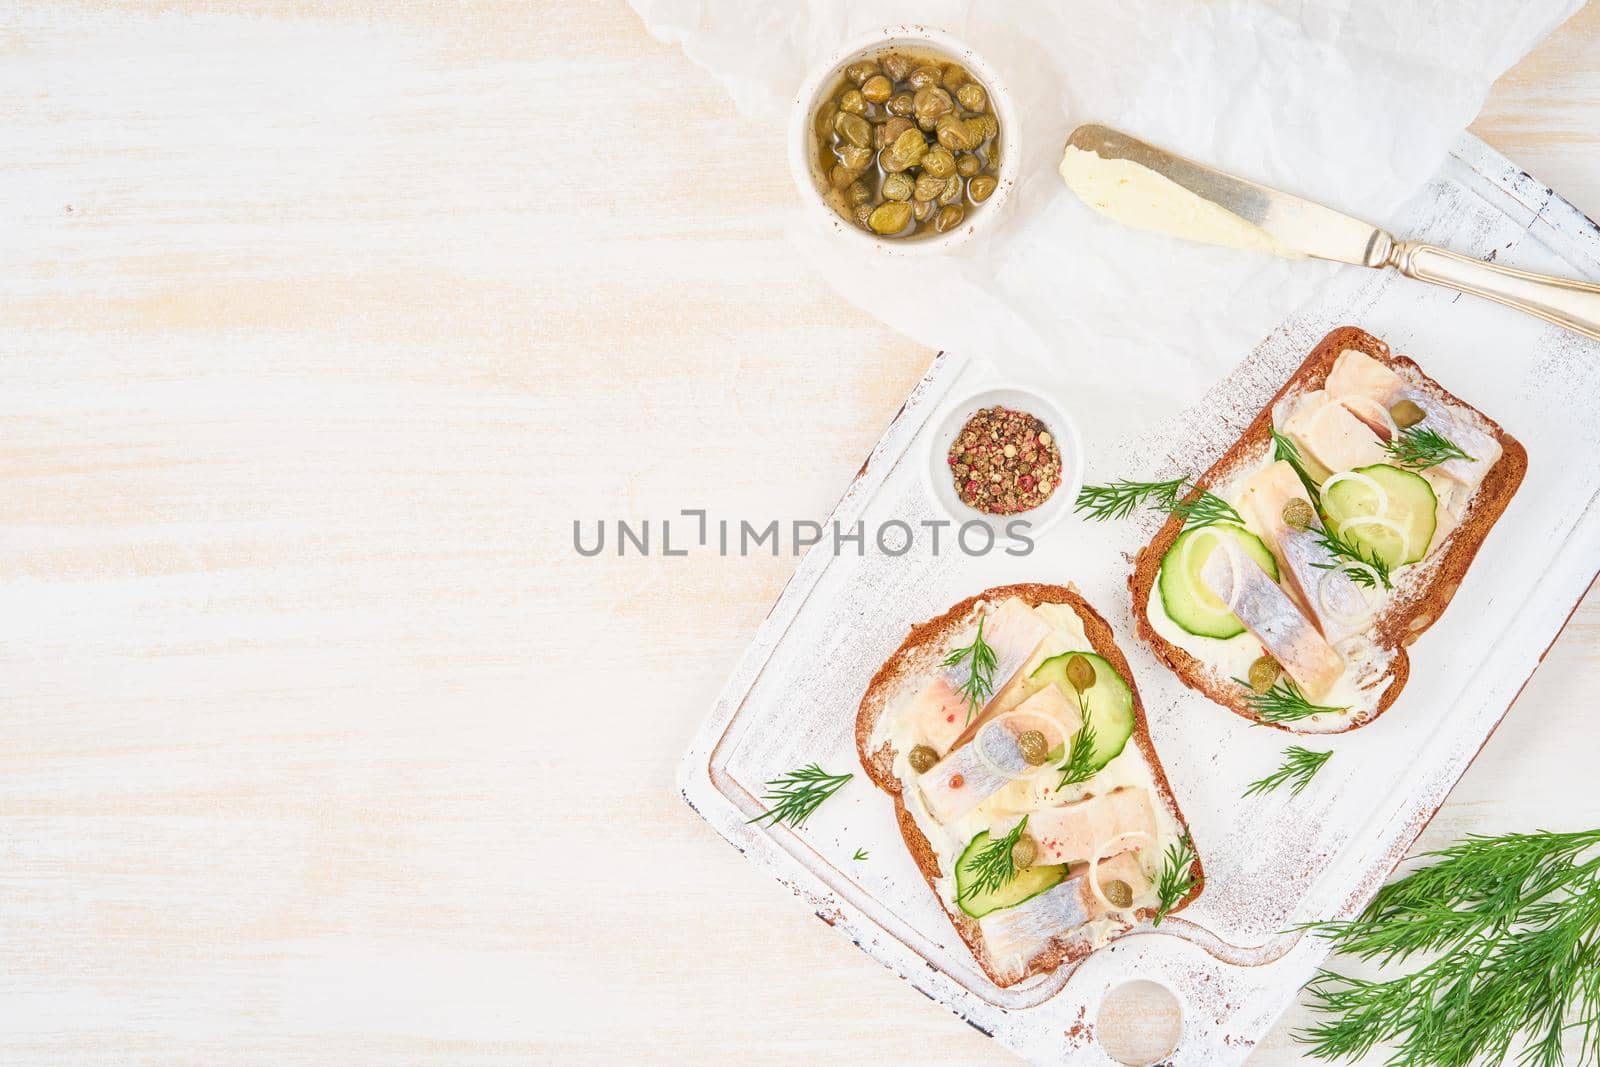 Herring smorrebrod - traditional Danish sandwiches. Black rye bread with herring on white wooden board, top view, copy space